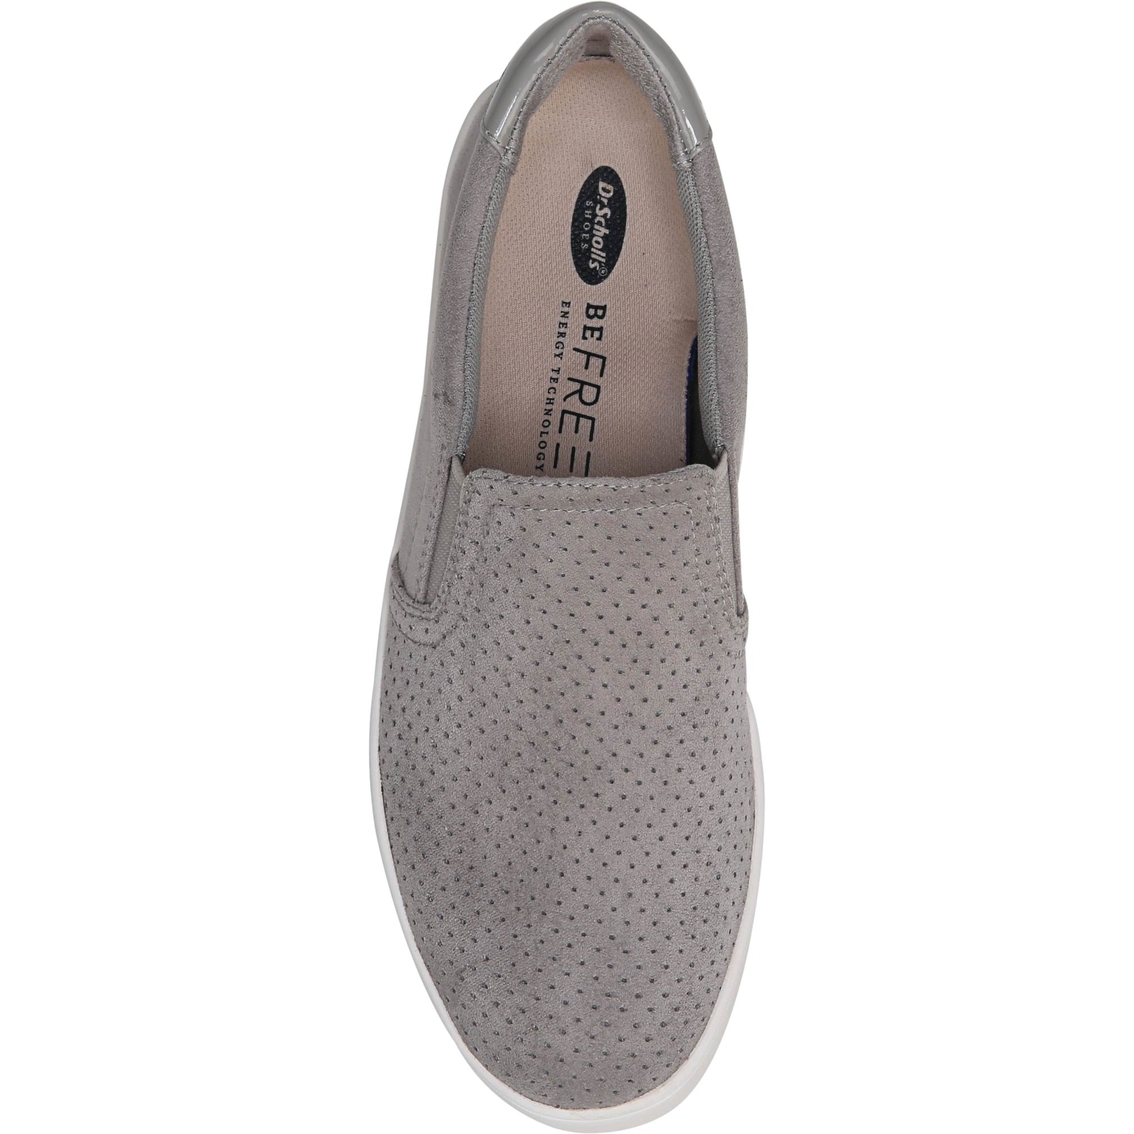 Dr. Scholl's Madison Slip On Sneakers - Image 3 of 4